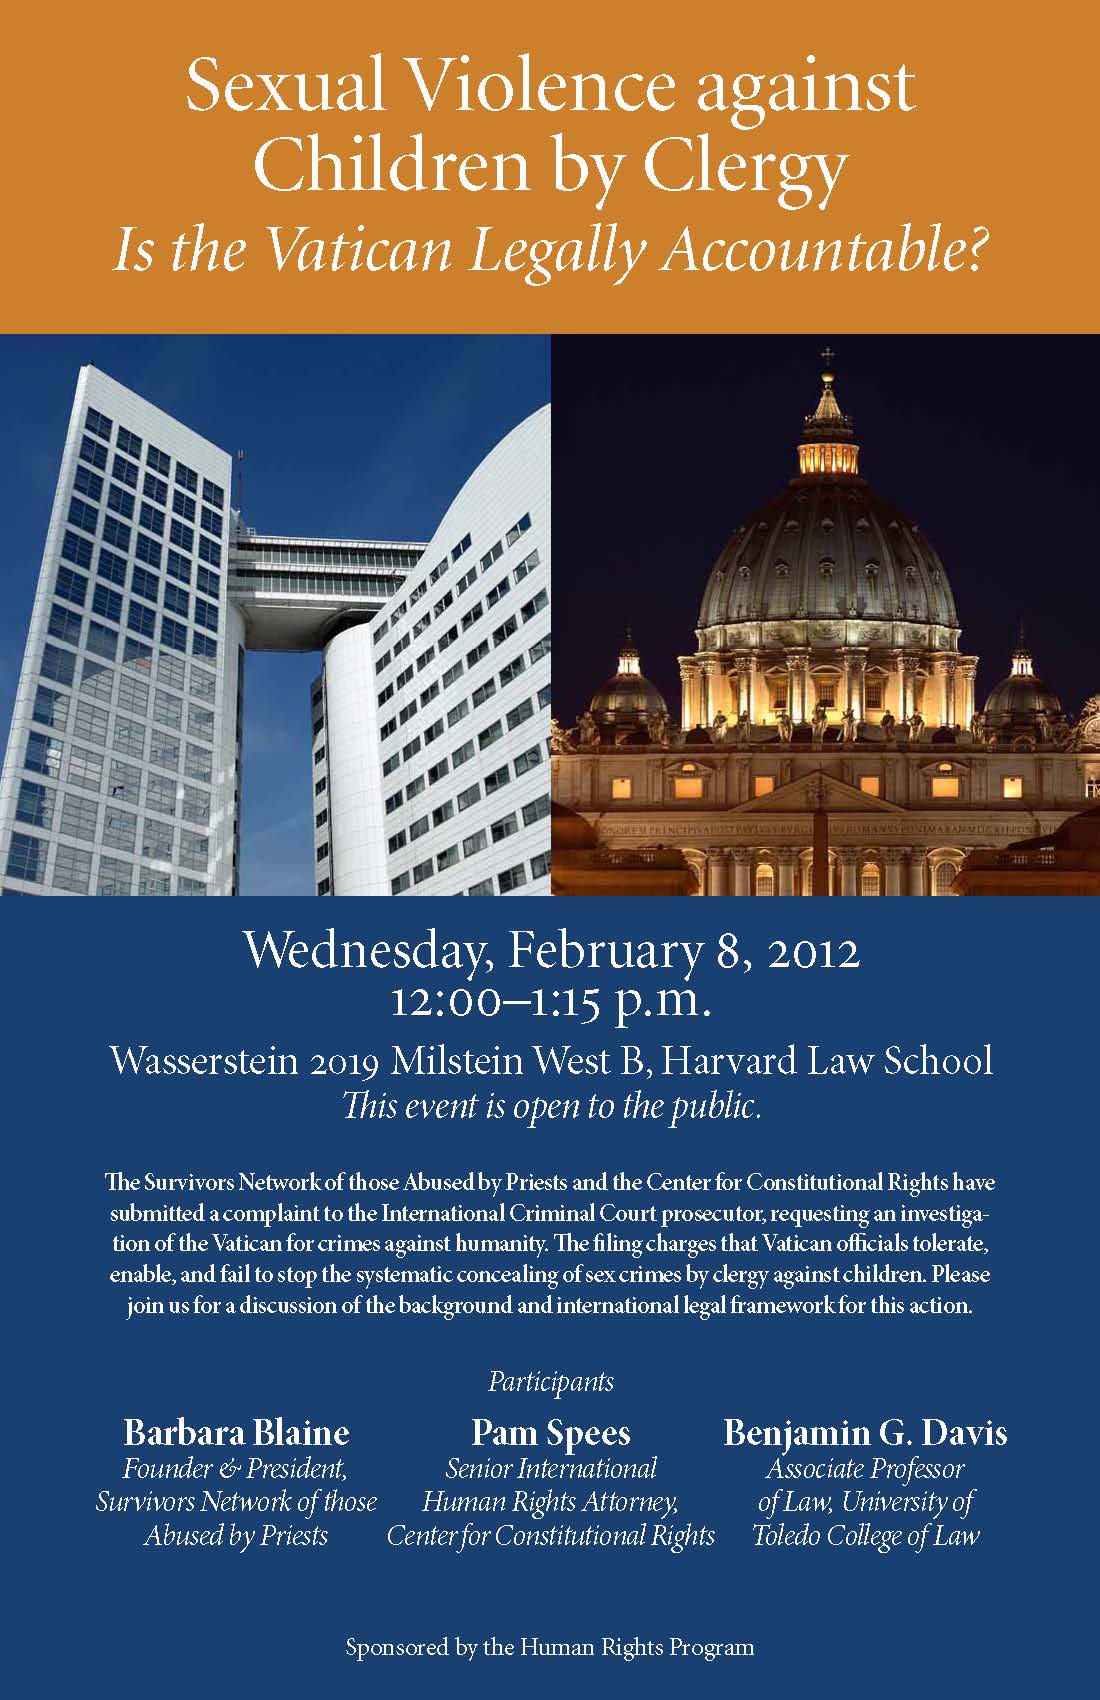 "Sexual Violence against Children by Clergy" above Vatican building and event details